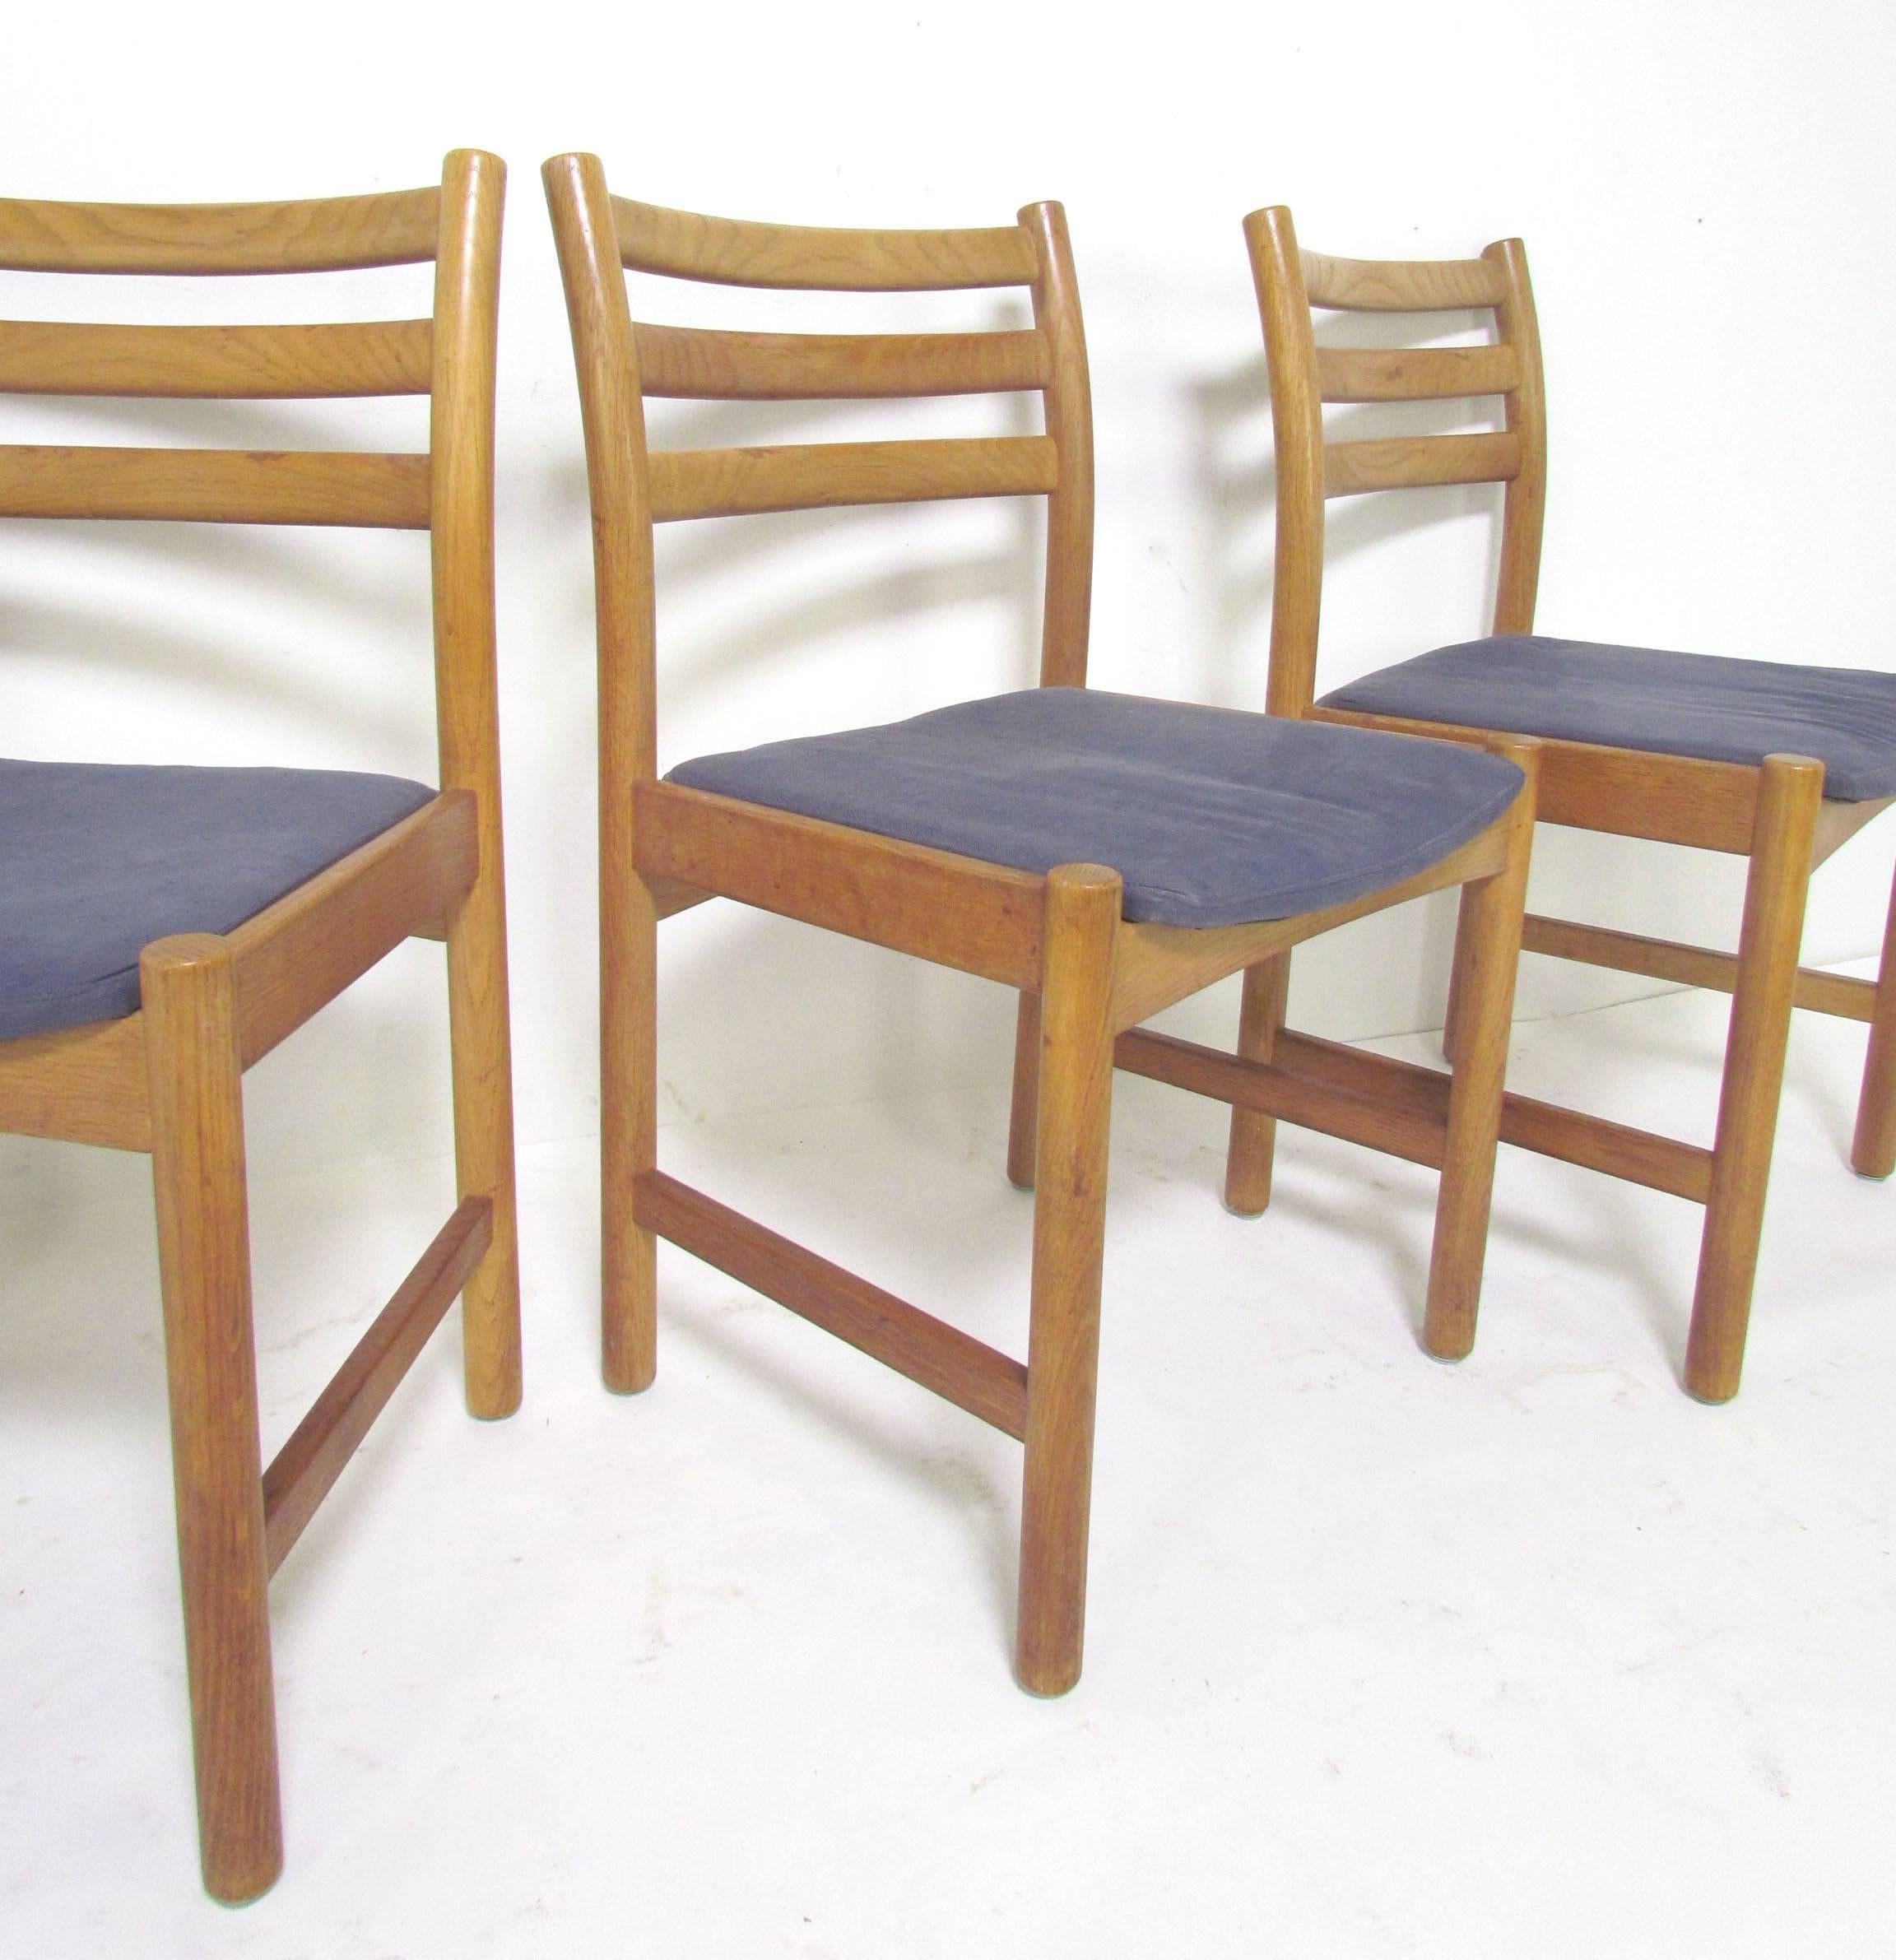 Set of eight ladder back Danish dining chairs in washed oak designed by Poul Volther for Soro Stolefabrik, circa mid-1960s.